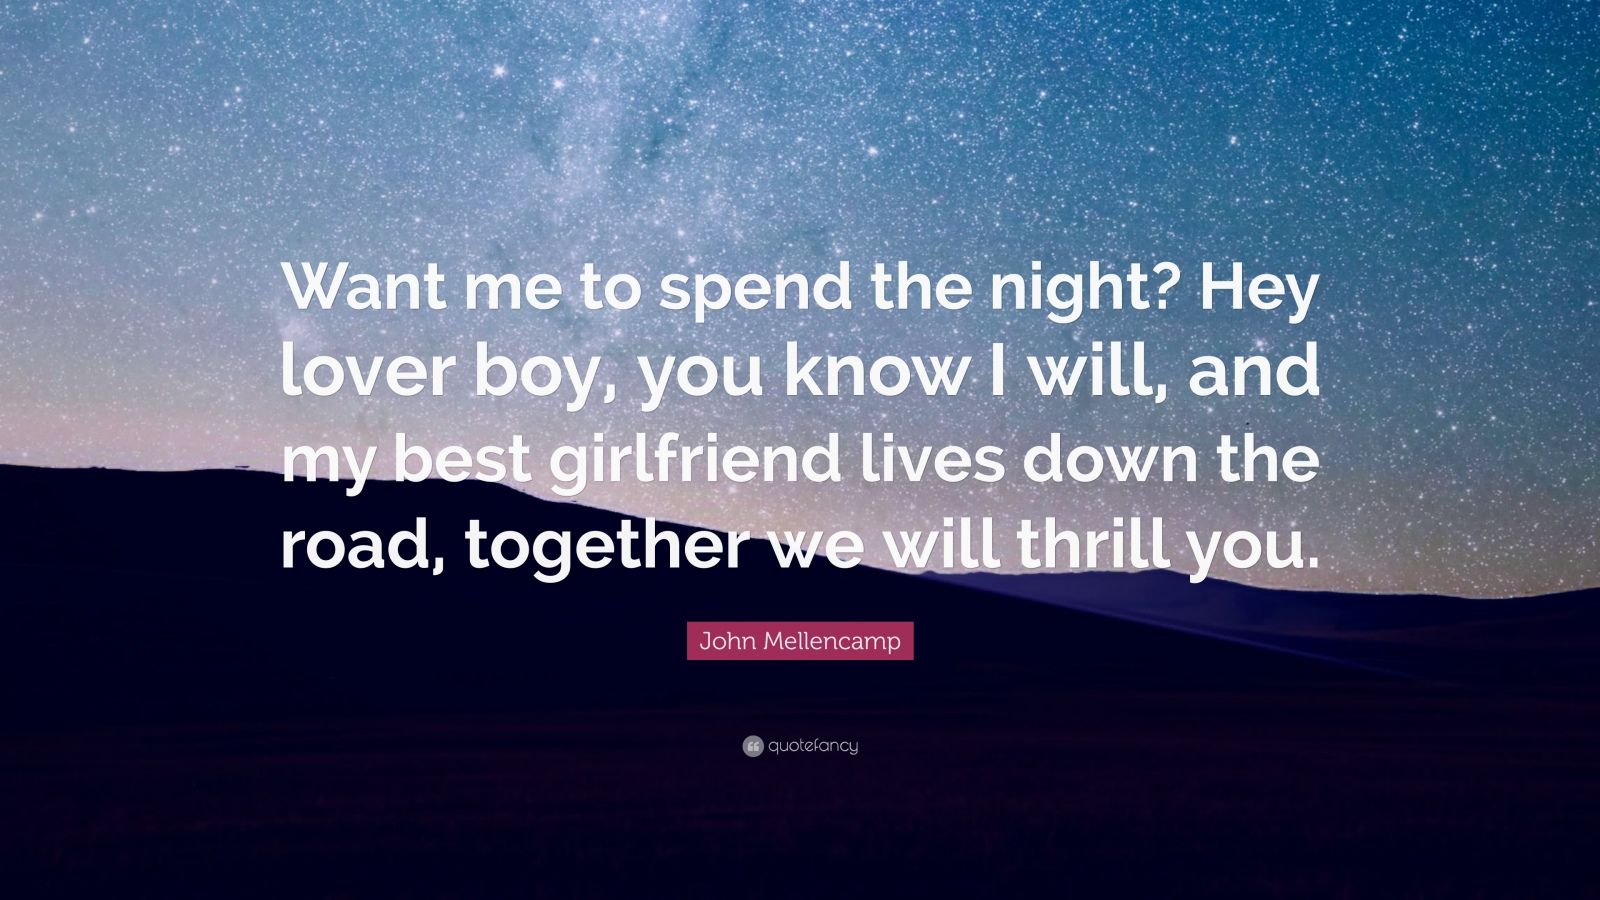 John Mellencamp Quote: “Want me to spend the night? Hey lover boy